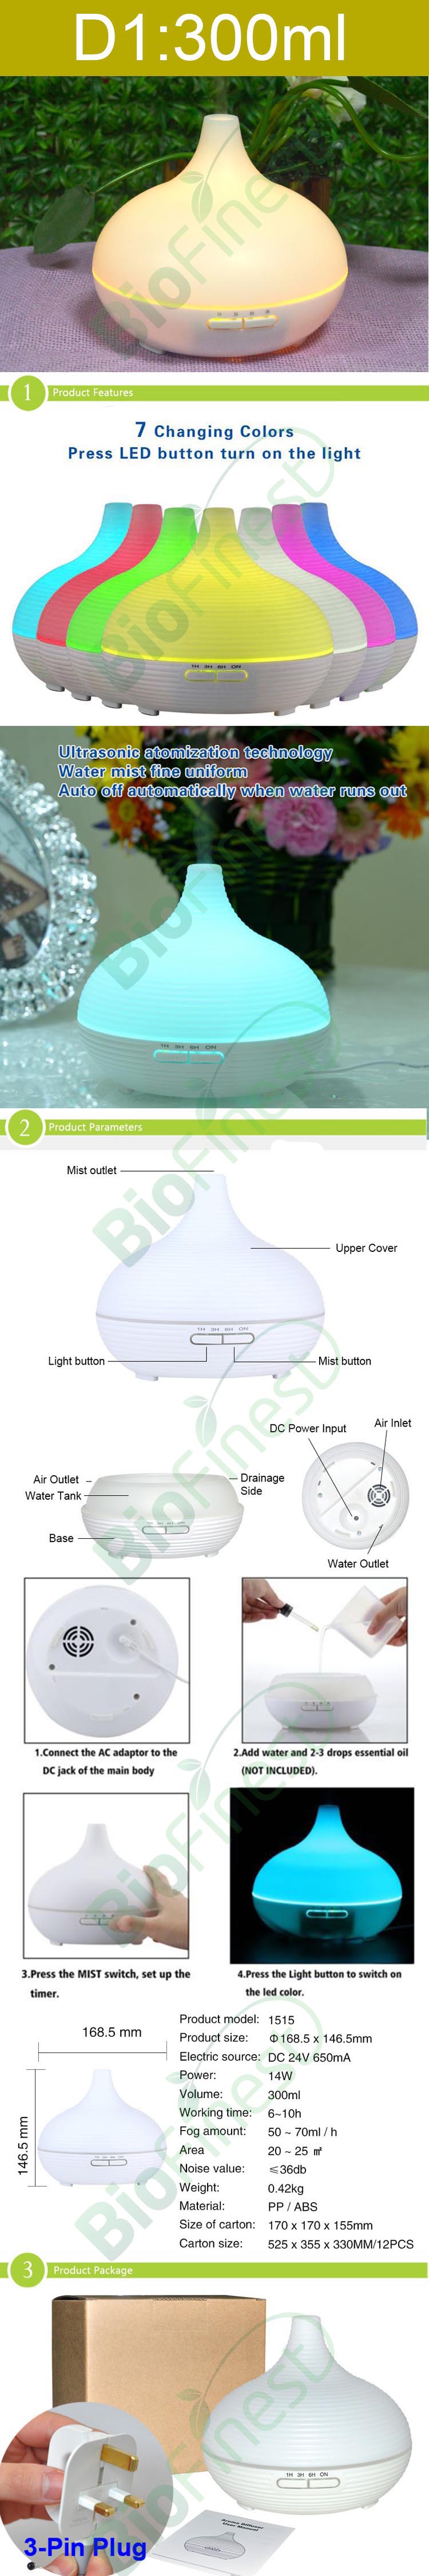 D1 (300ml) Ultrasonic Aroma Diffuser/ Air Humidifier/ Purifier/ 7-Color